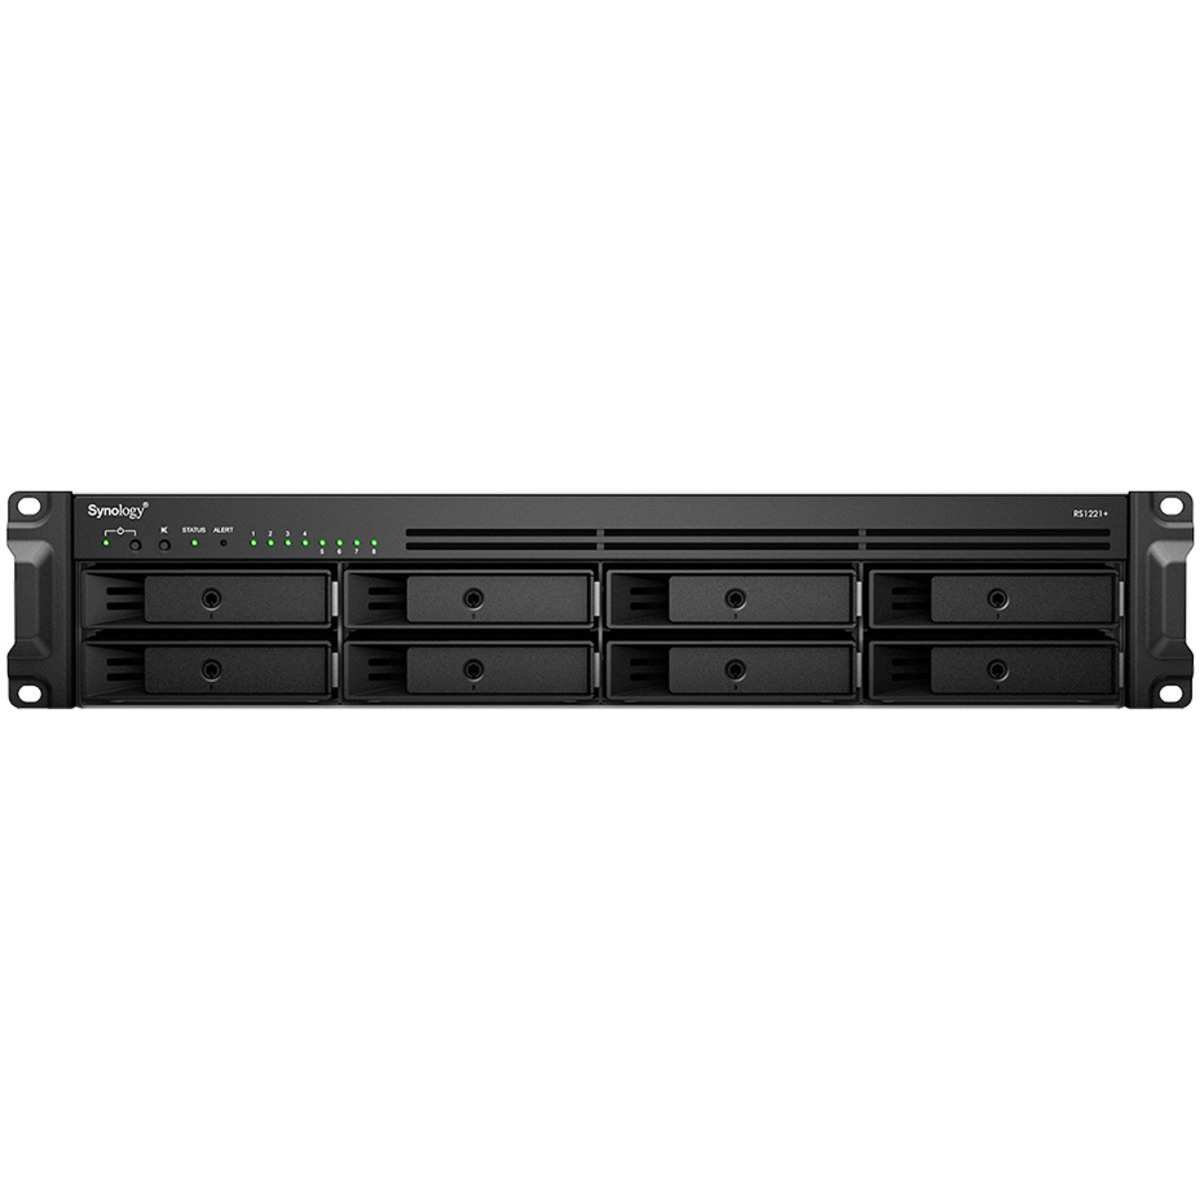 buy $8616 Synology RackStation RS1221+ 64tb RackMount NAS - Network Attached Storage Device 8x8000gb Samsung 870 QVO MZ-77Q8T0 2.5 SATA 6Gb/s SSD CONSUMER Class Drives Installed - Burn-In Tested - nas headquarters buy network attached storage server device das new raid-5 free shipping usa christmas new year holiday sale RackStation RS1221+